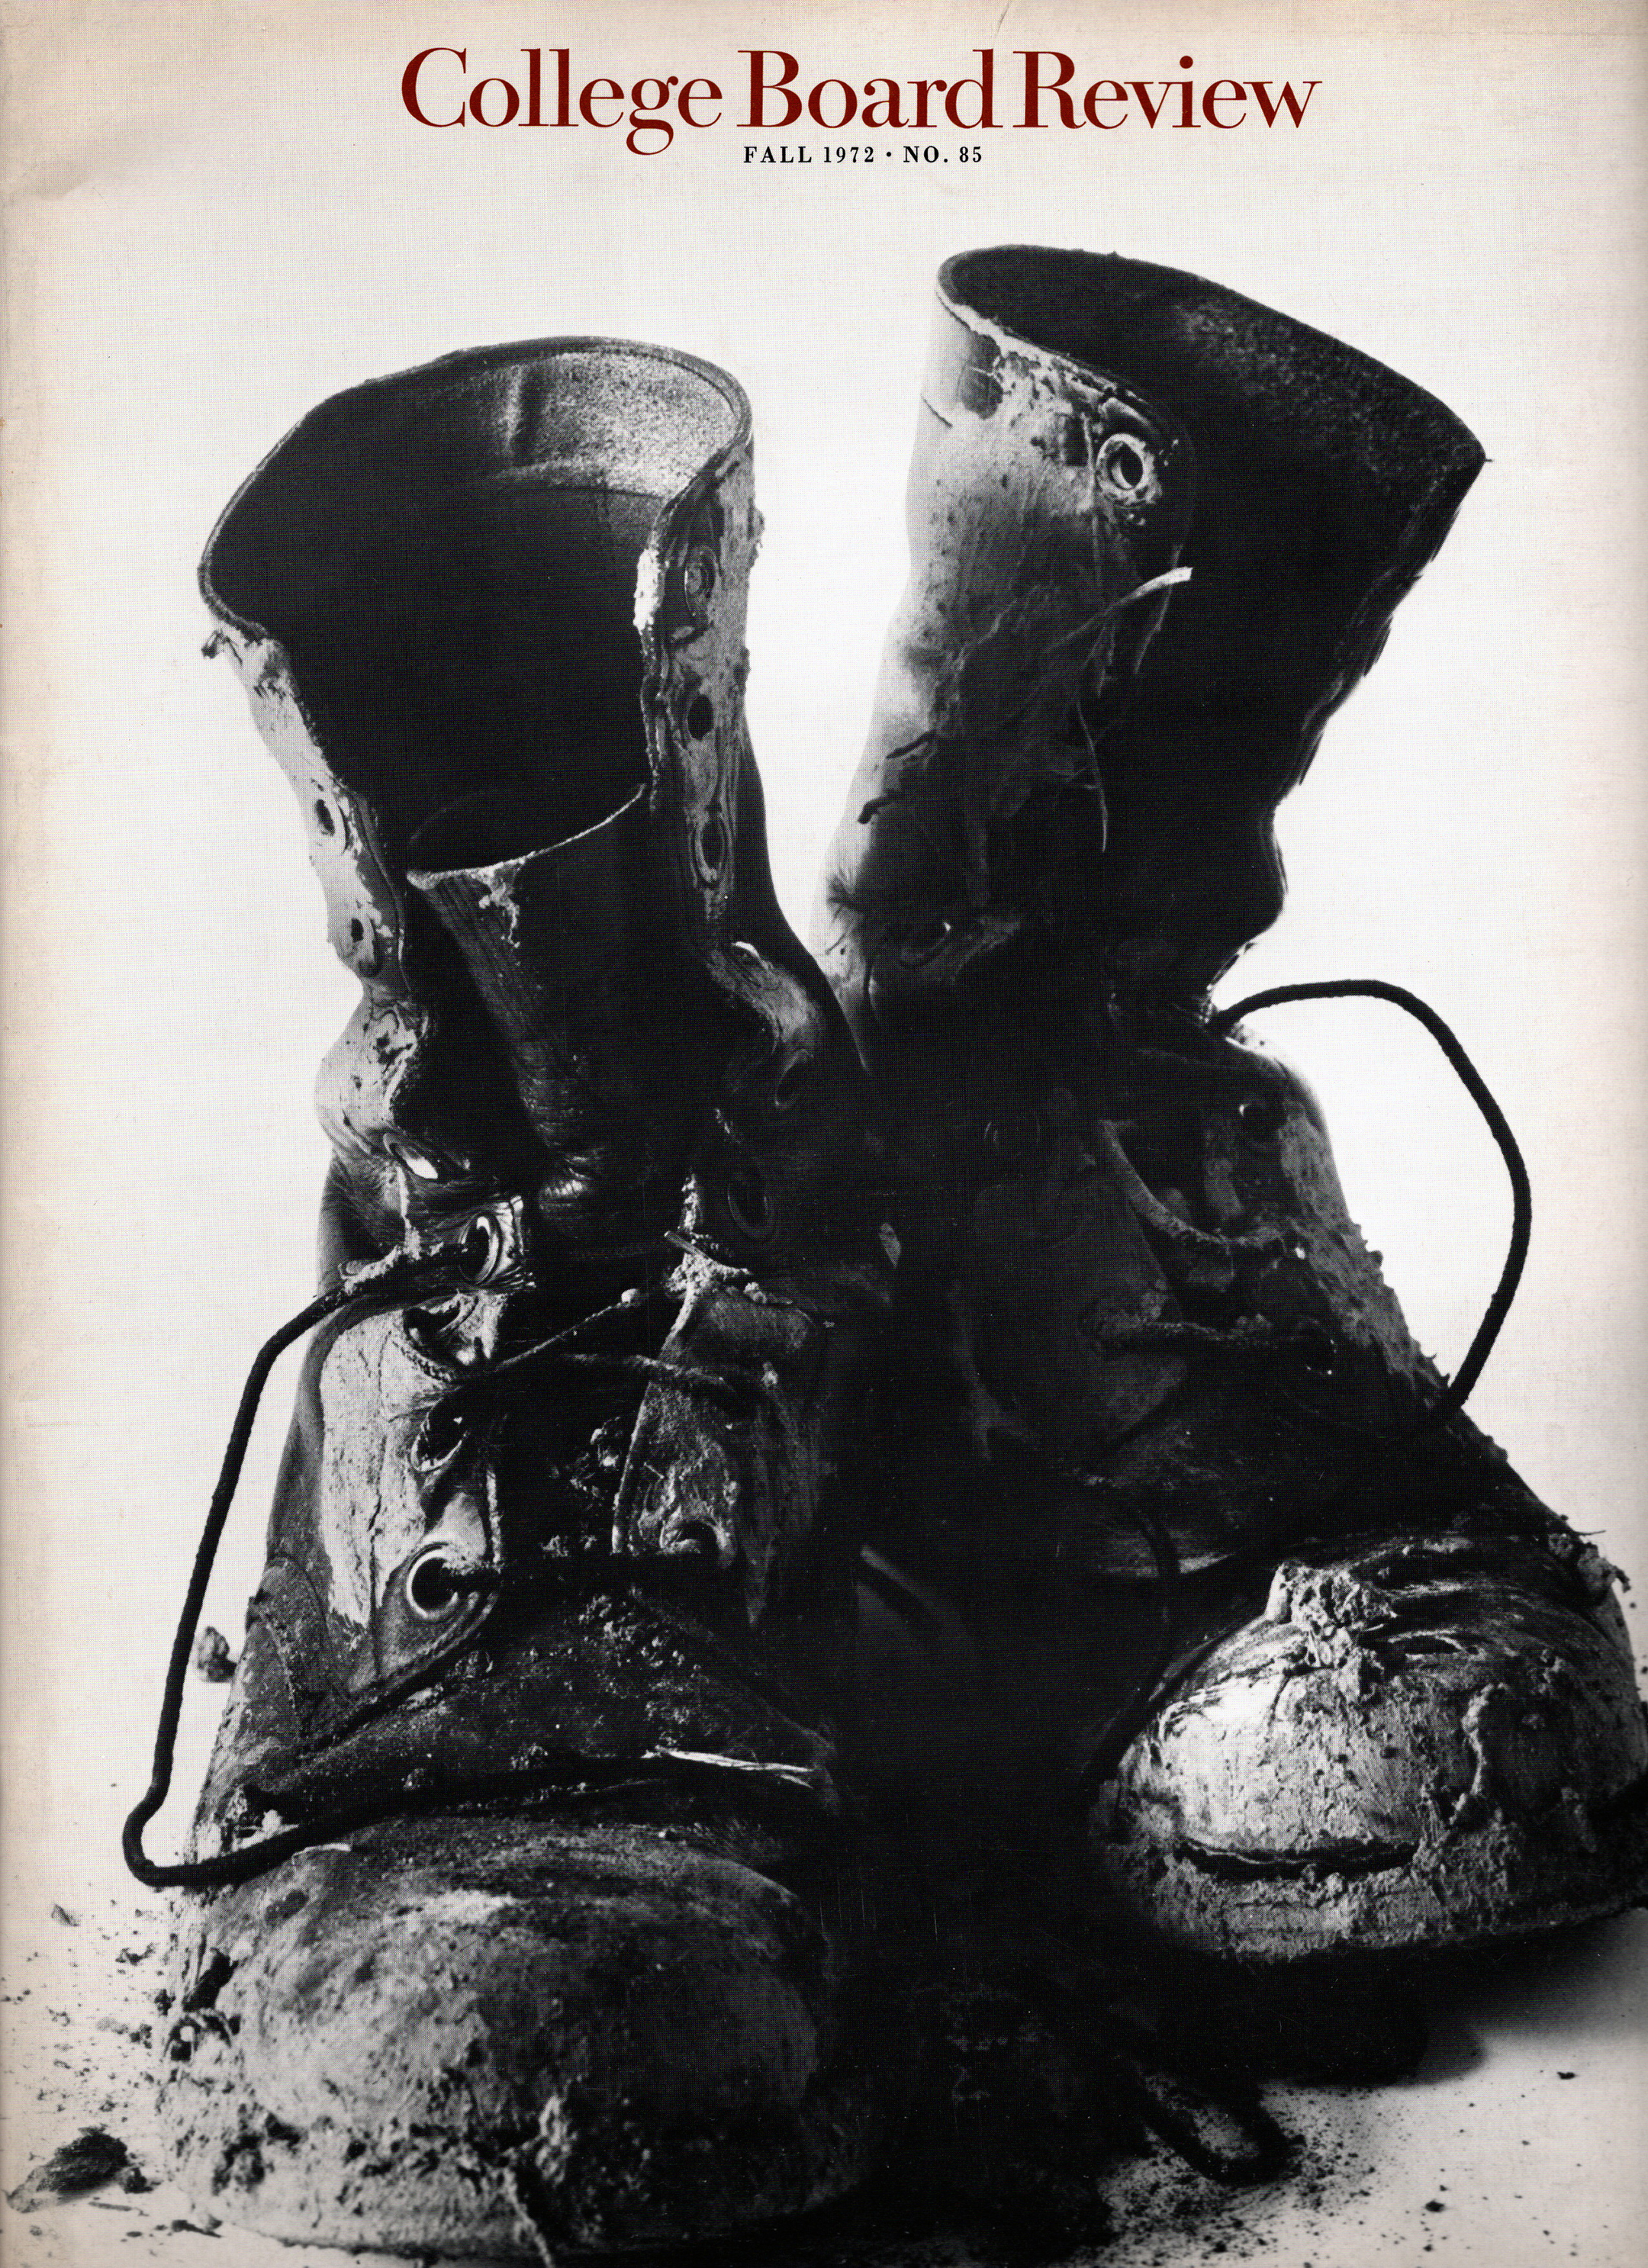 cover of the spring 1972 issue of the college board review, showing a pair of worn and muddy combat boots